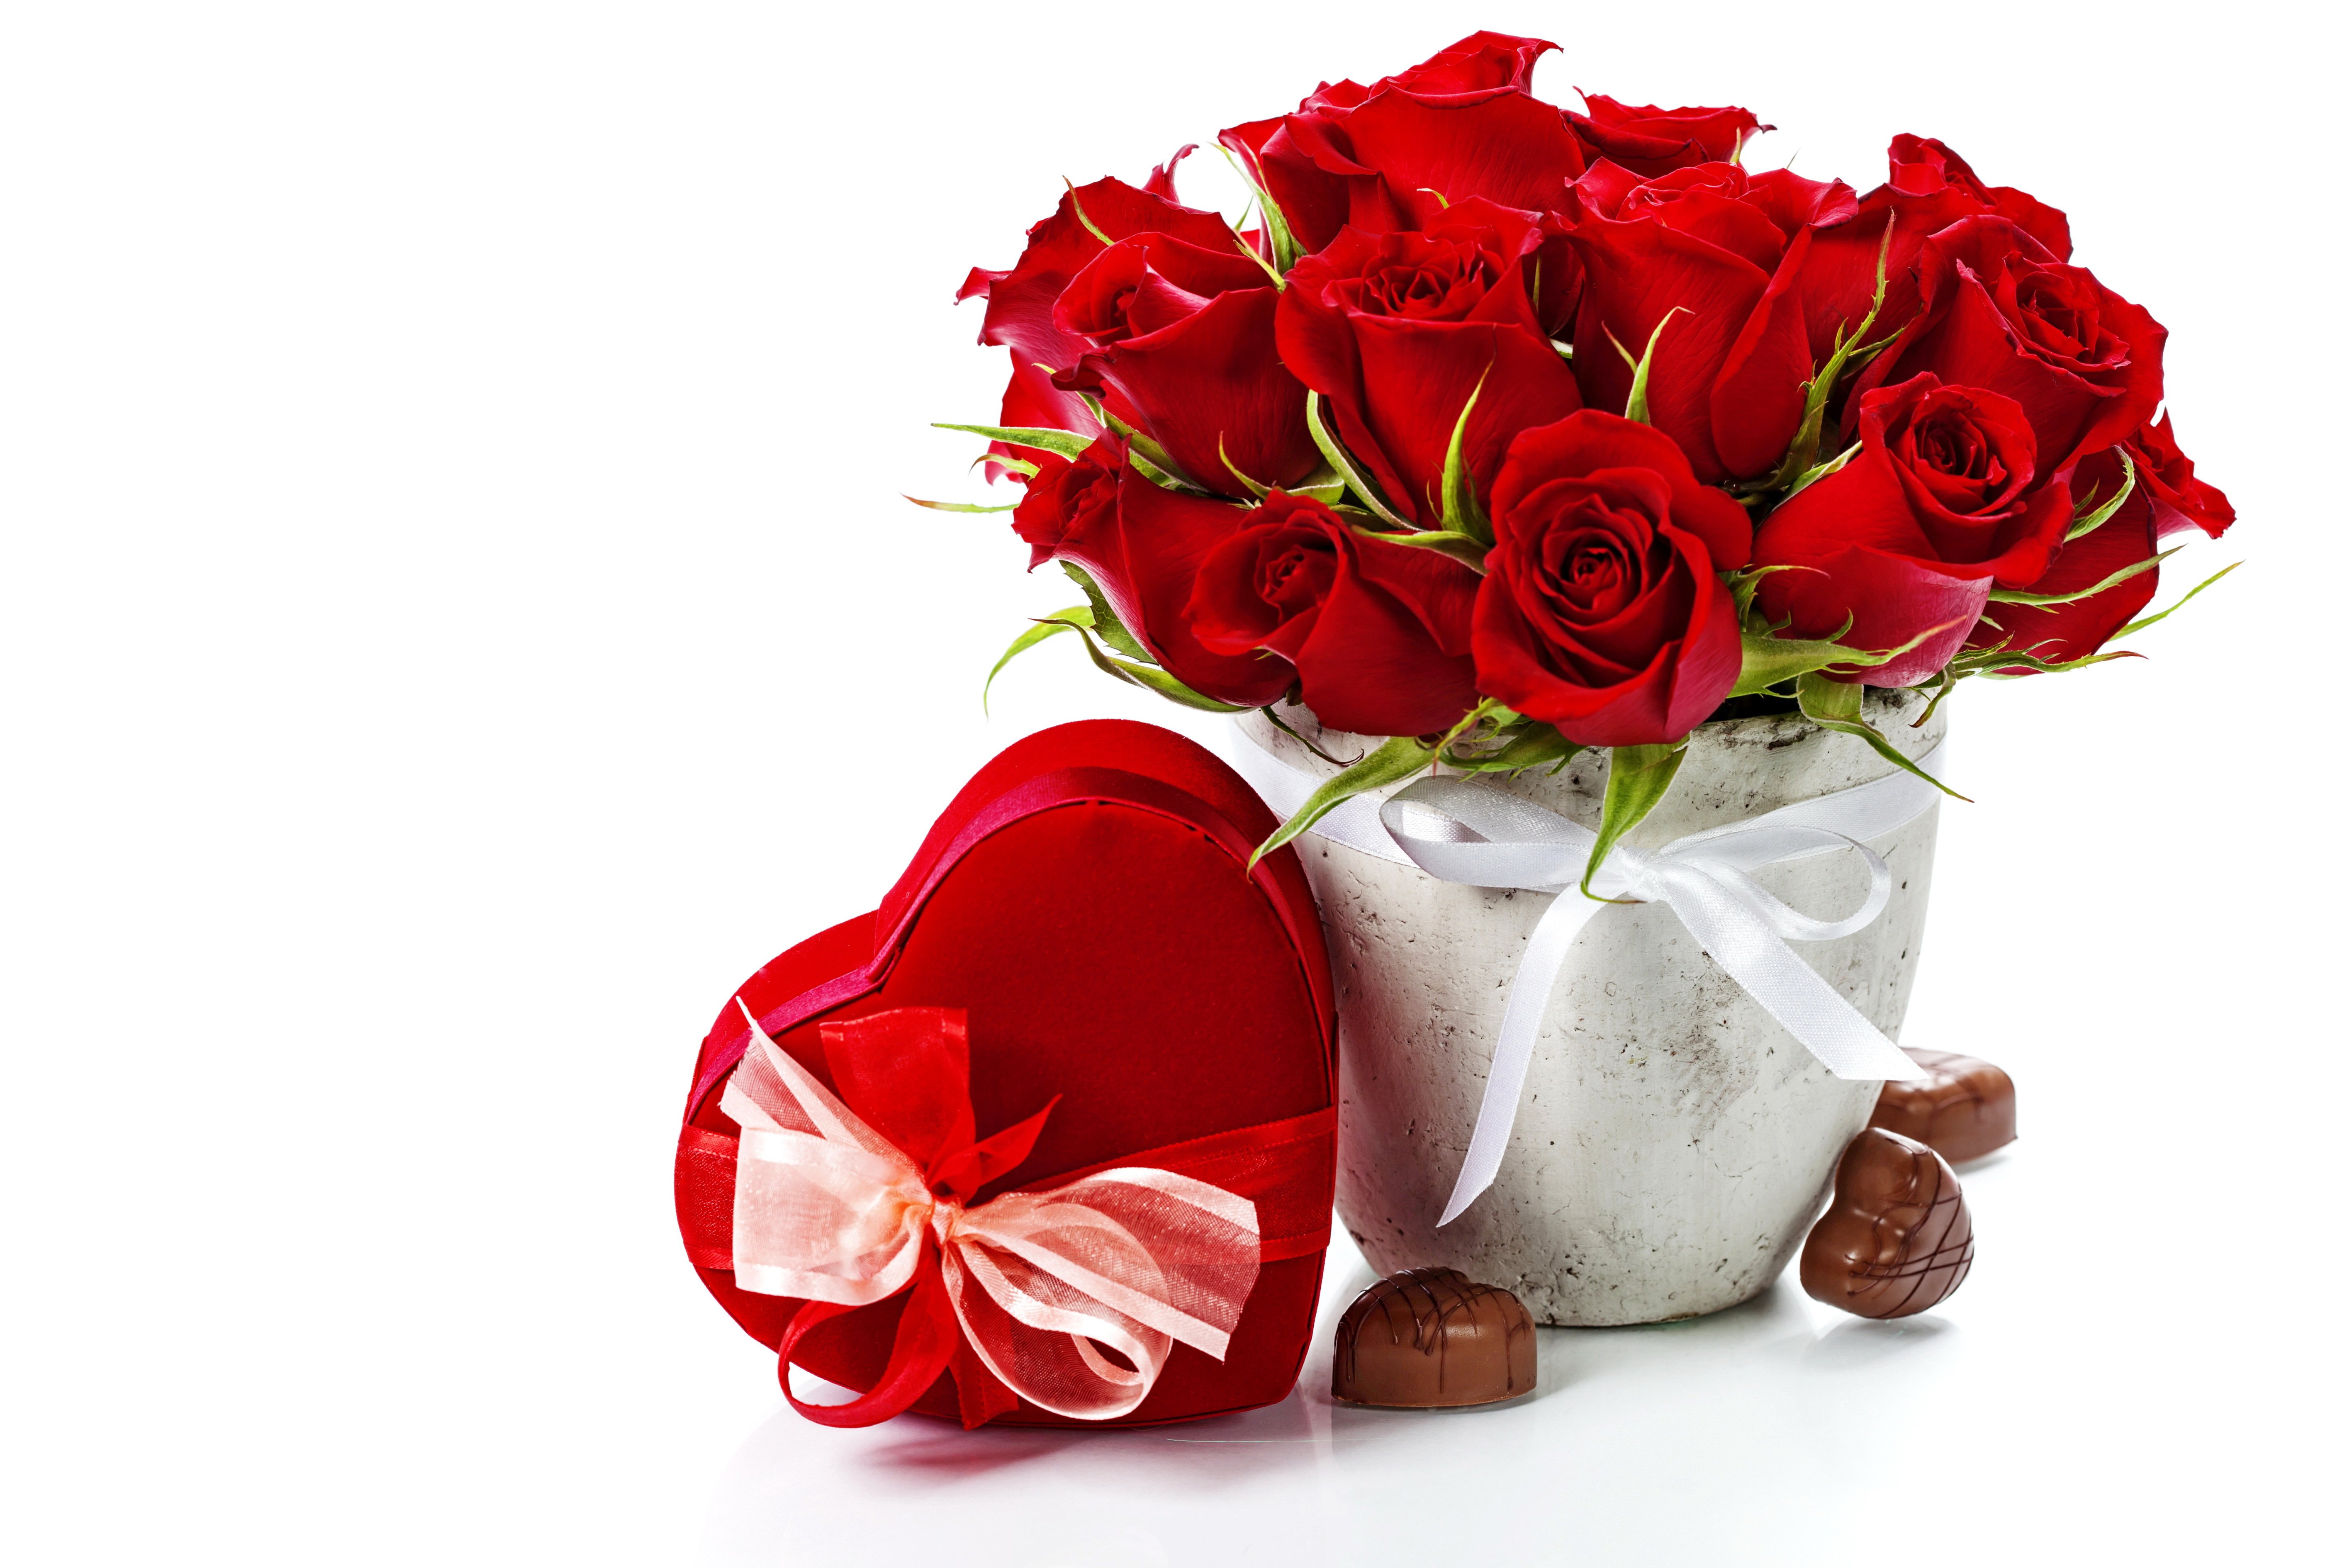 rose, Flowers, Red, Love, Romance, Life, For, Chocolate, Gift, Couple, Bouquet  Wallpapers HD / Desktop and Mobile Backgrounds